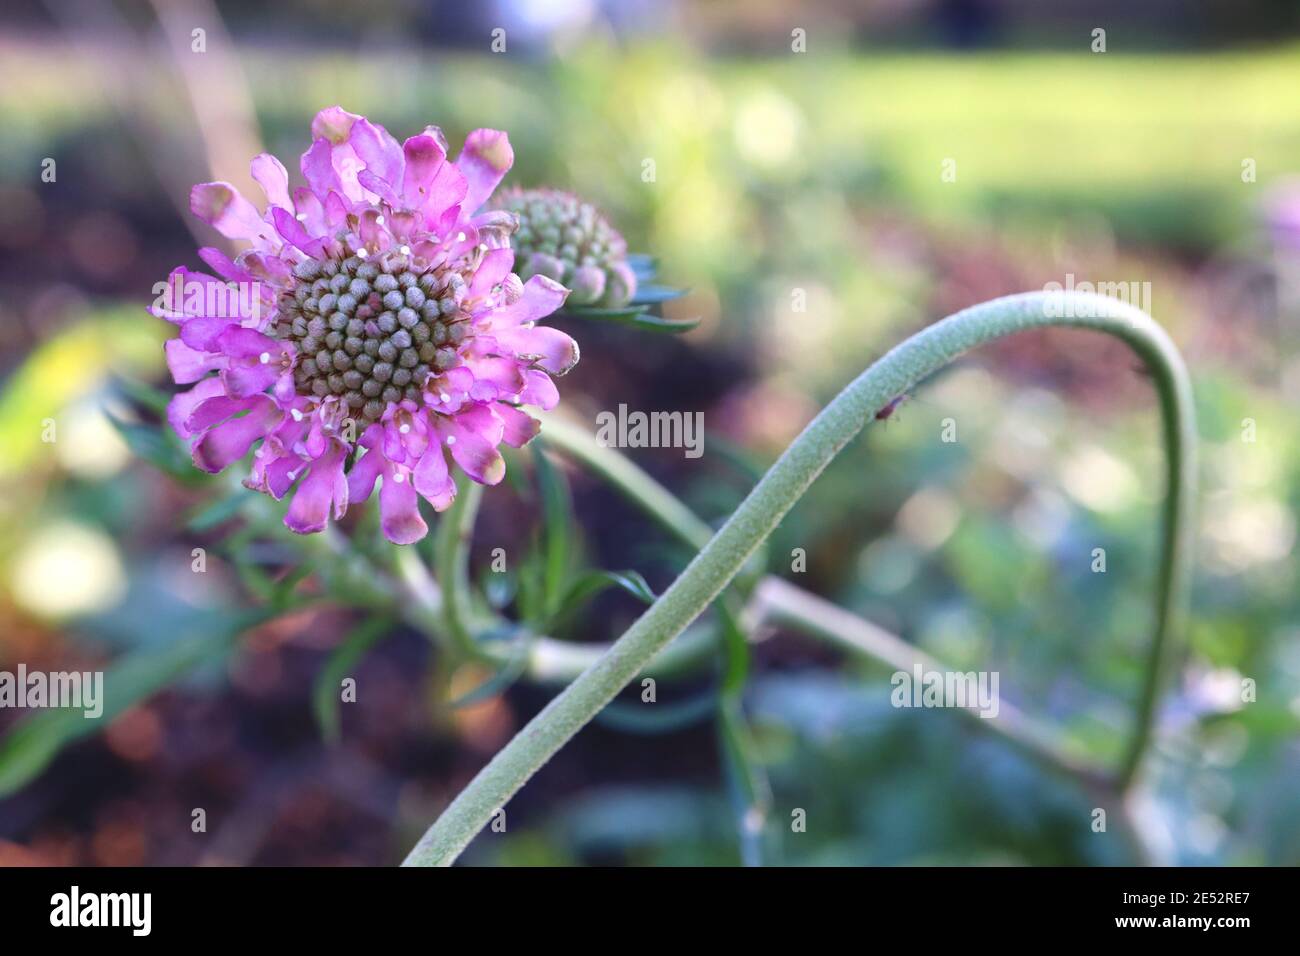 Scabiosa columbaria ‘Pink Mist’ Scabious Pink Mist – pink pincushion flower with bending stem, January, England, UK Stock Photo